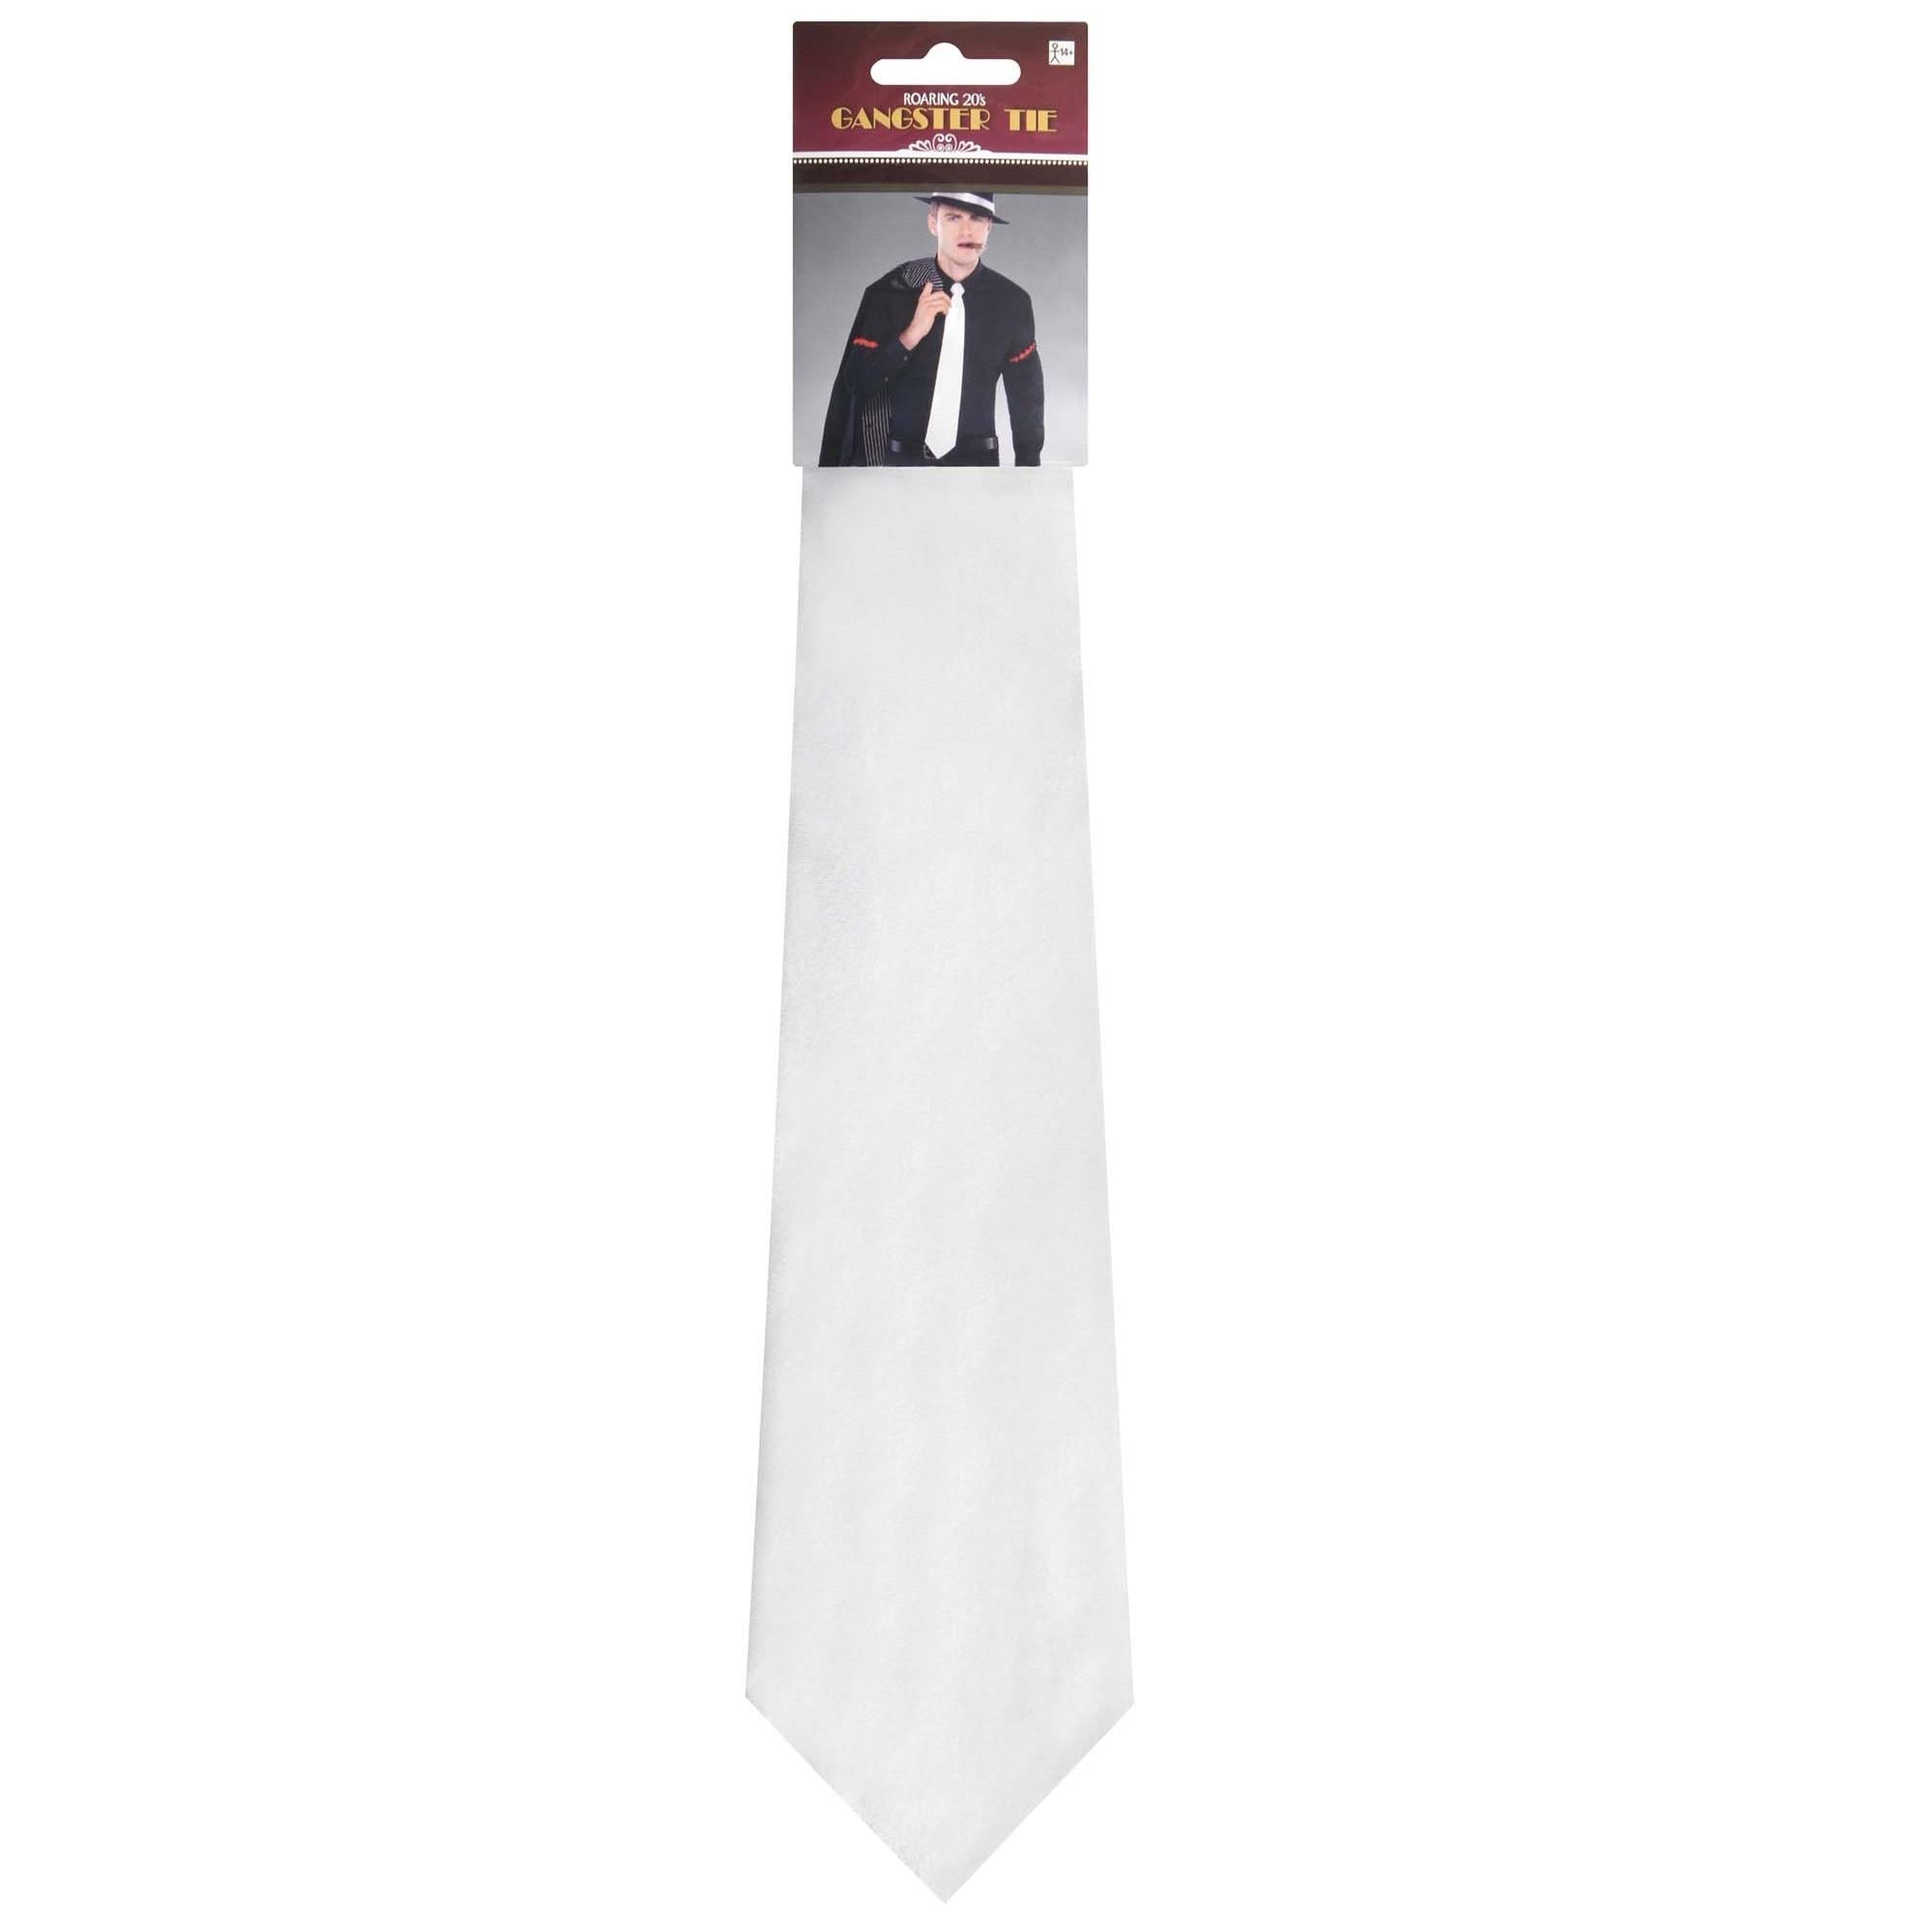 TIE 20 S GANGSTER WHITE Costumes & Apparel - Party Centre